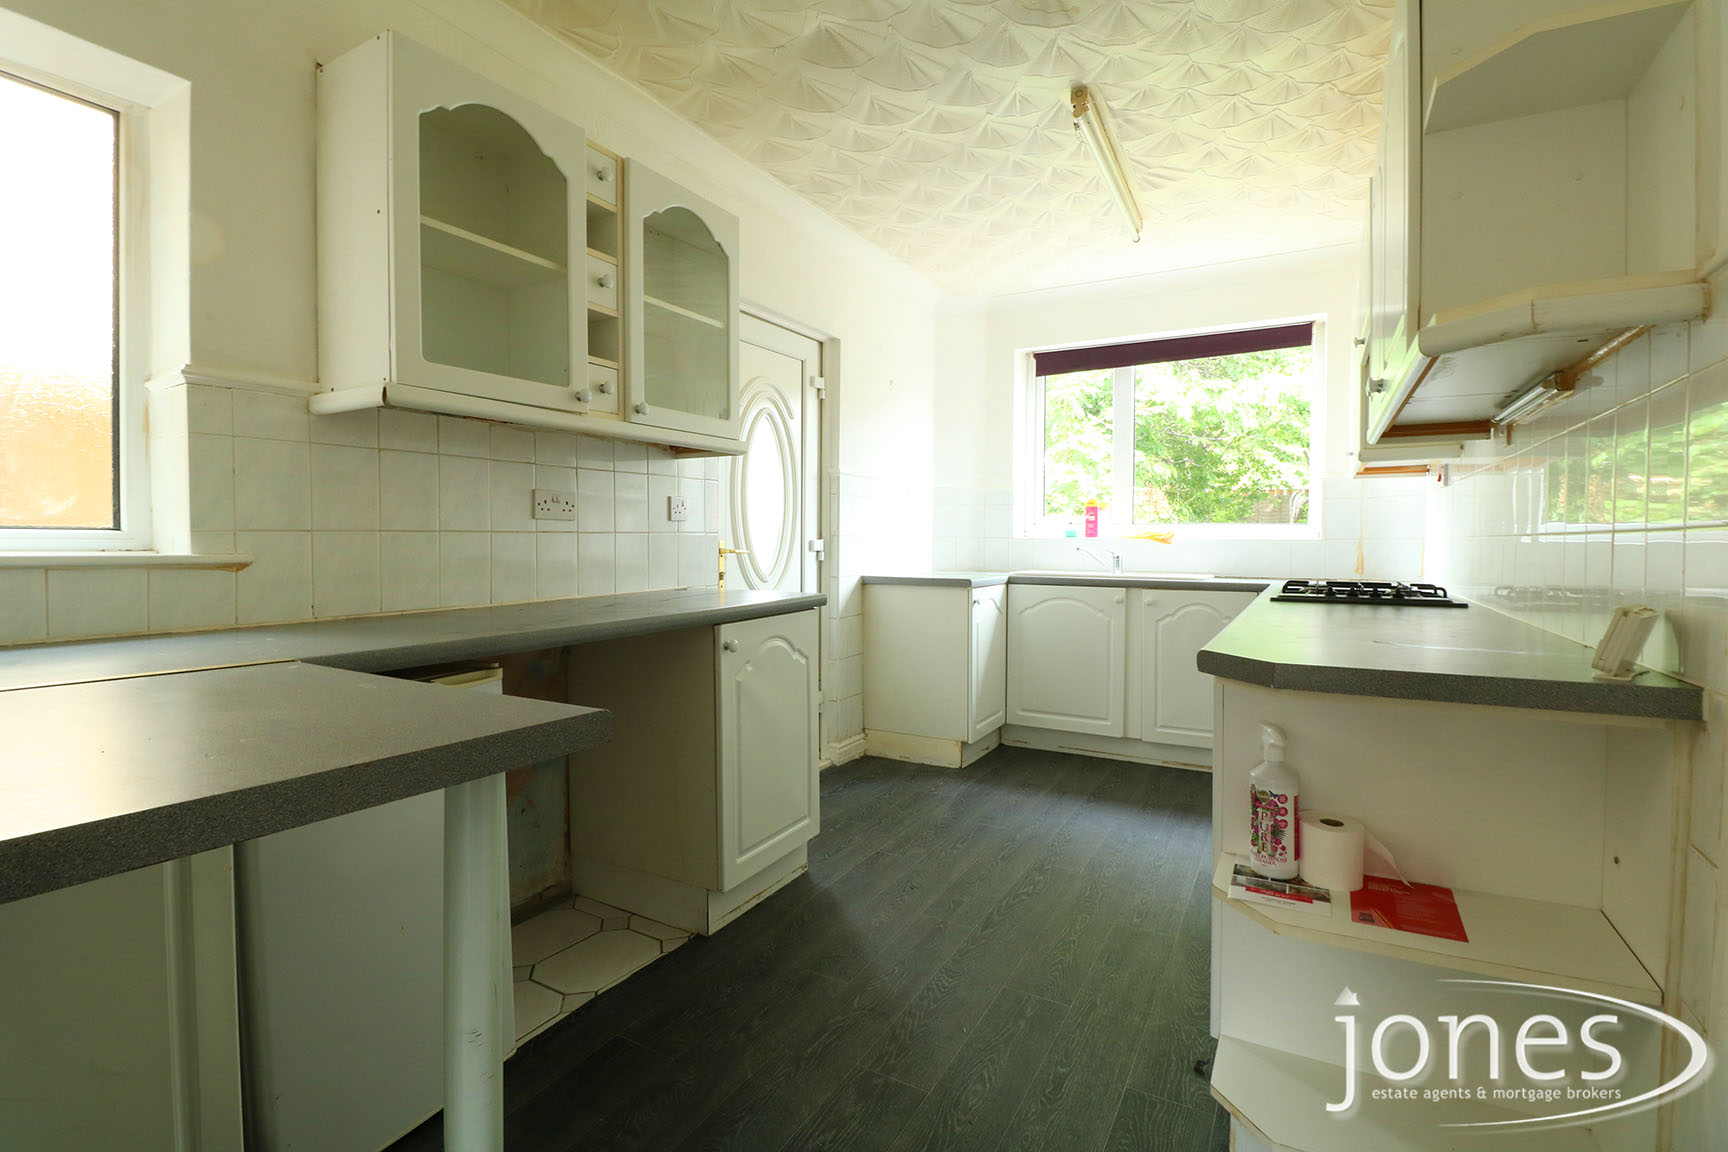 Home for Sale Let - Photo 04 Leven Road, Norton, Stockton on Tees, TS20 1DB